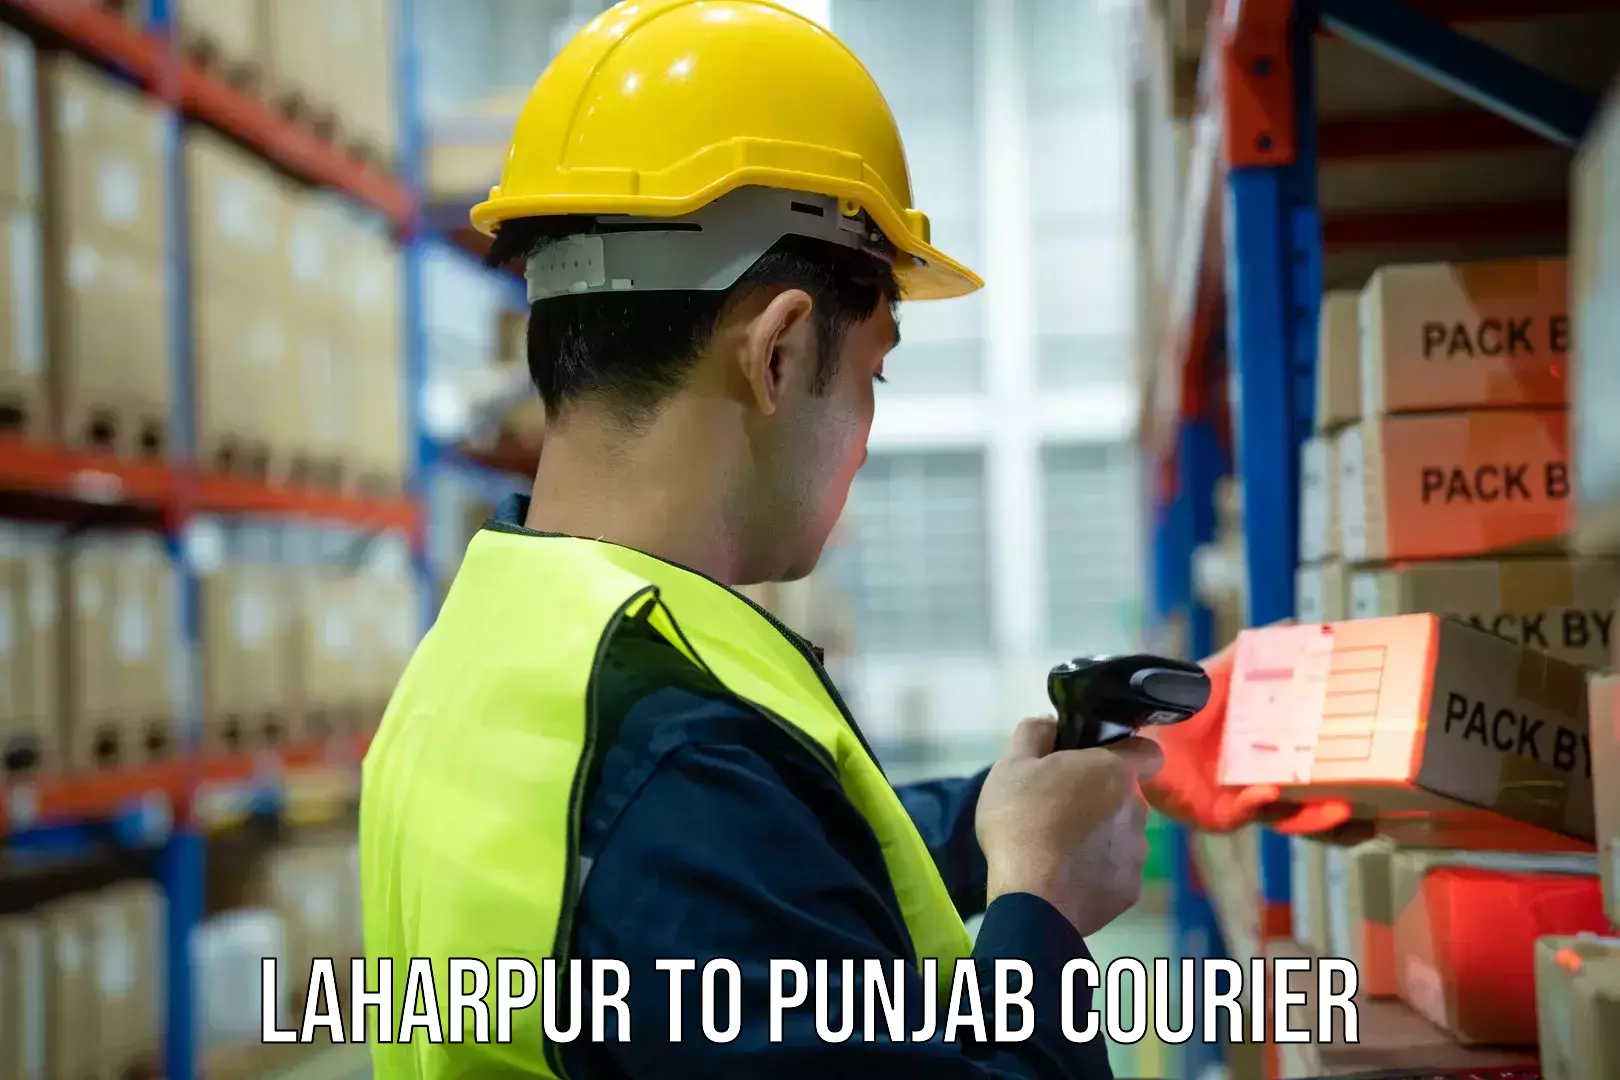 Nationwide courier service Laharpur to Sultanpur Lodhi